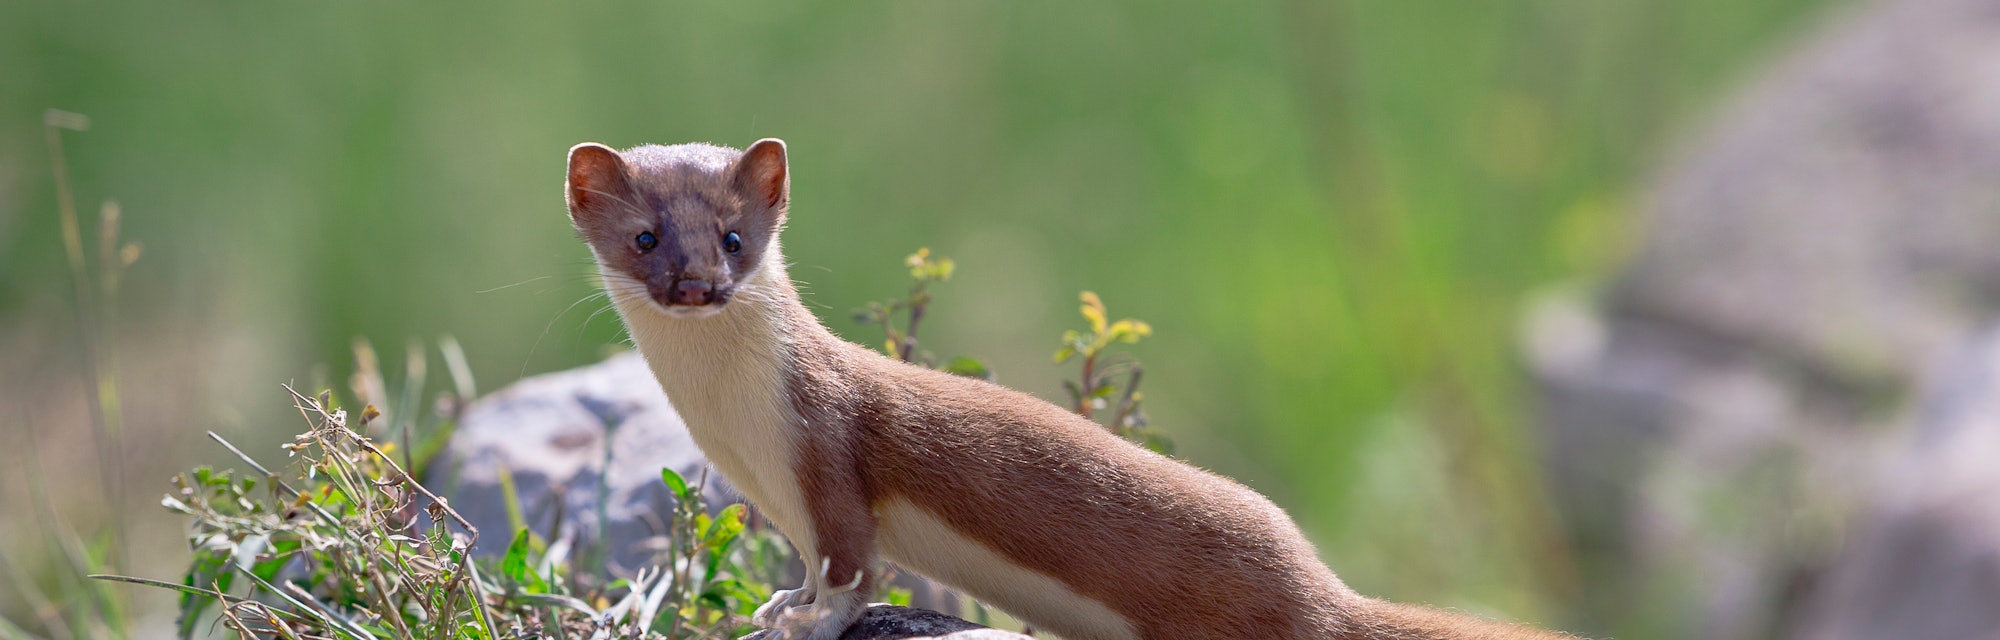 Long-tailed Weasel - (Mustafa frenata) also known as a Ermine hangs around a rock and foliage greens...